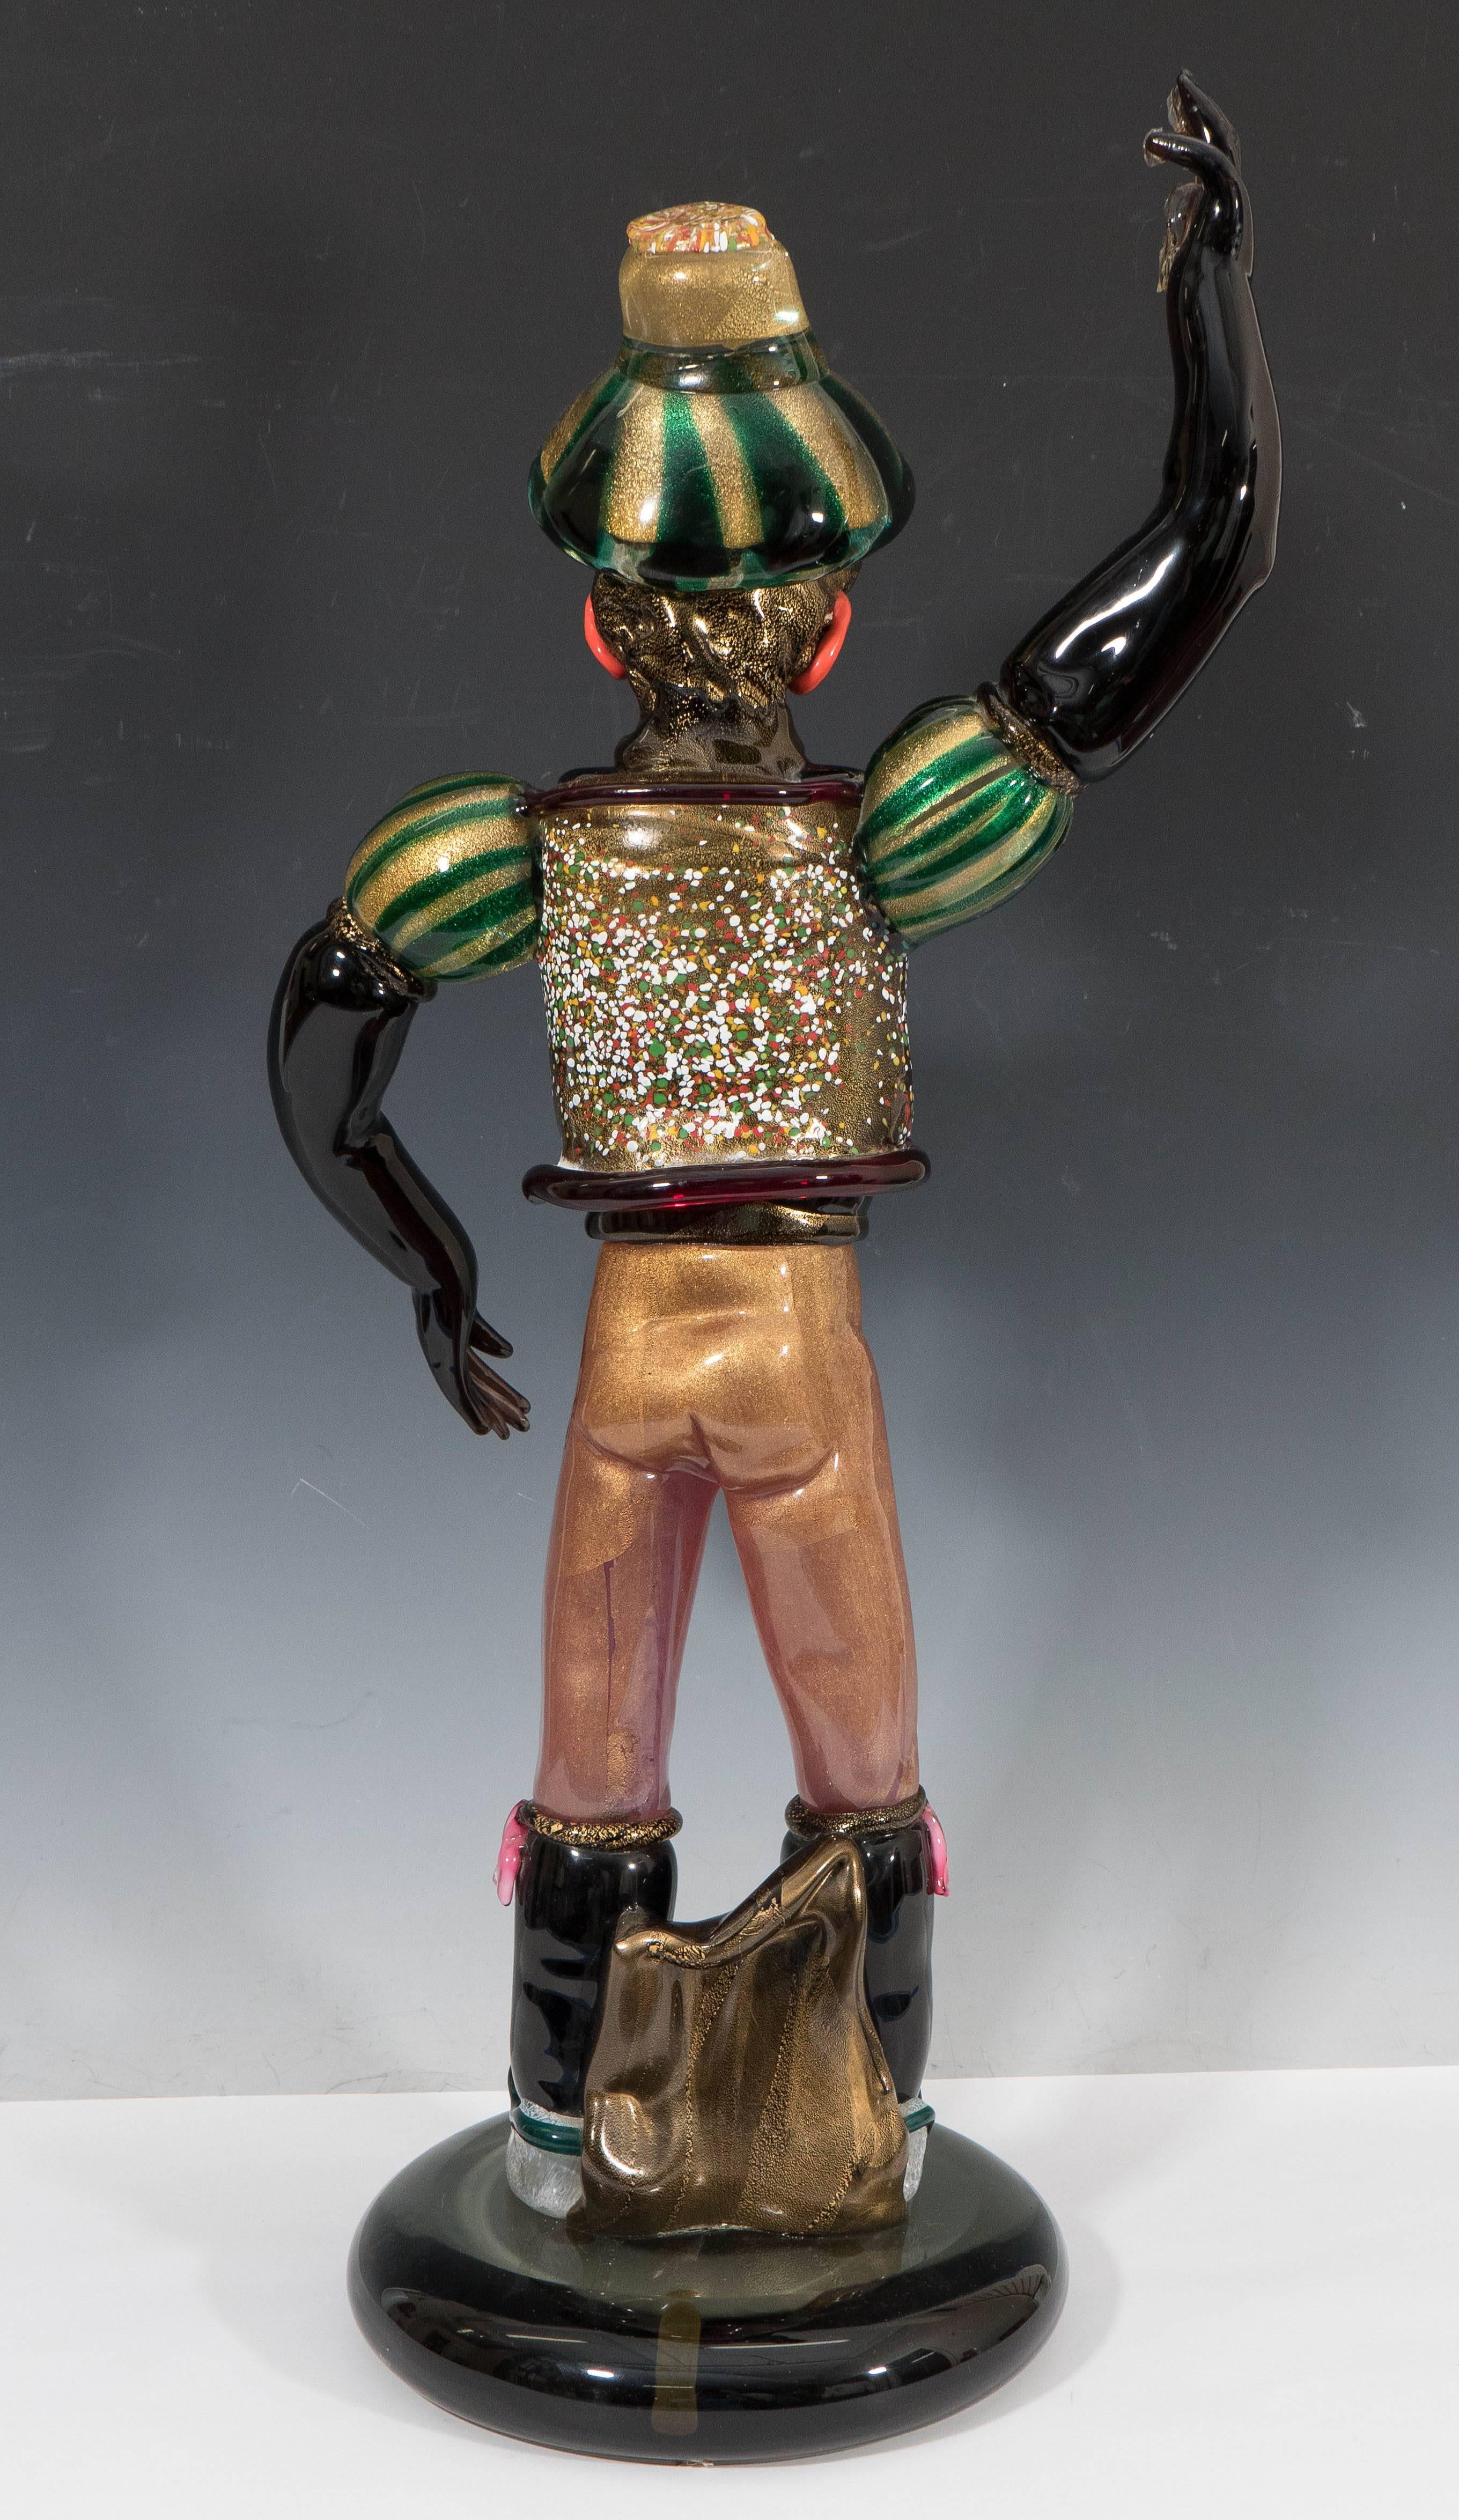 A Vintage Murano Glass Sculpture of Dancer in a Turban by Gino Cenedese  2